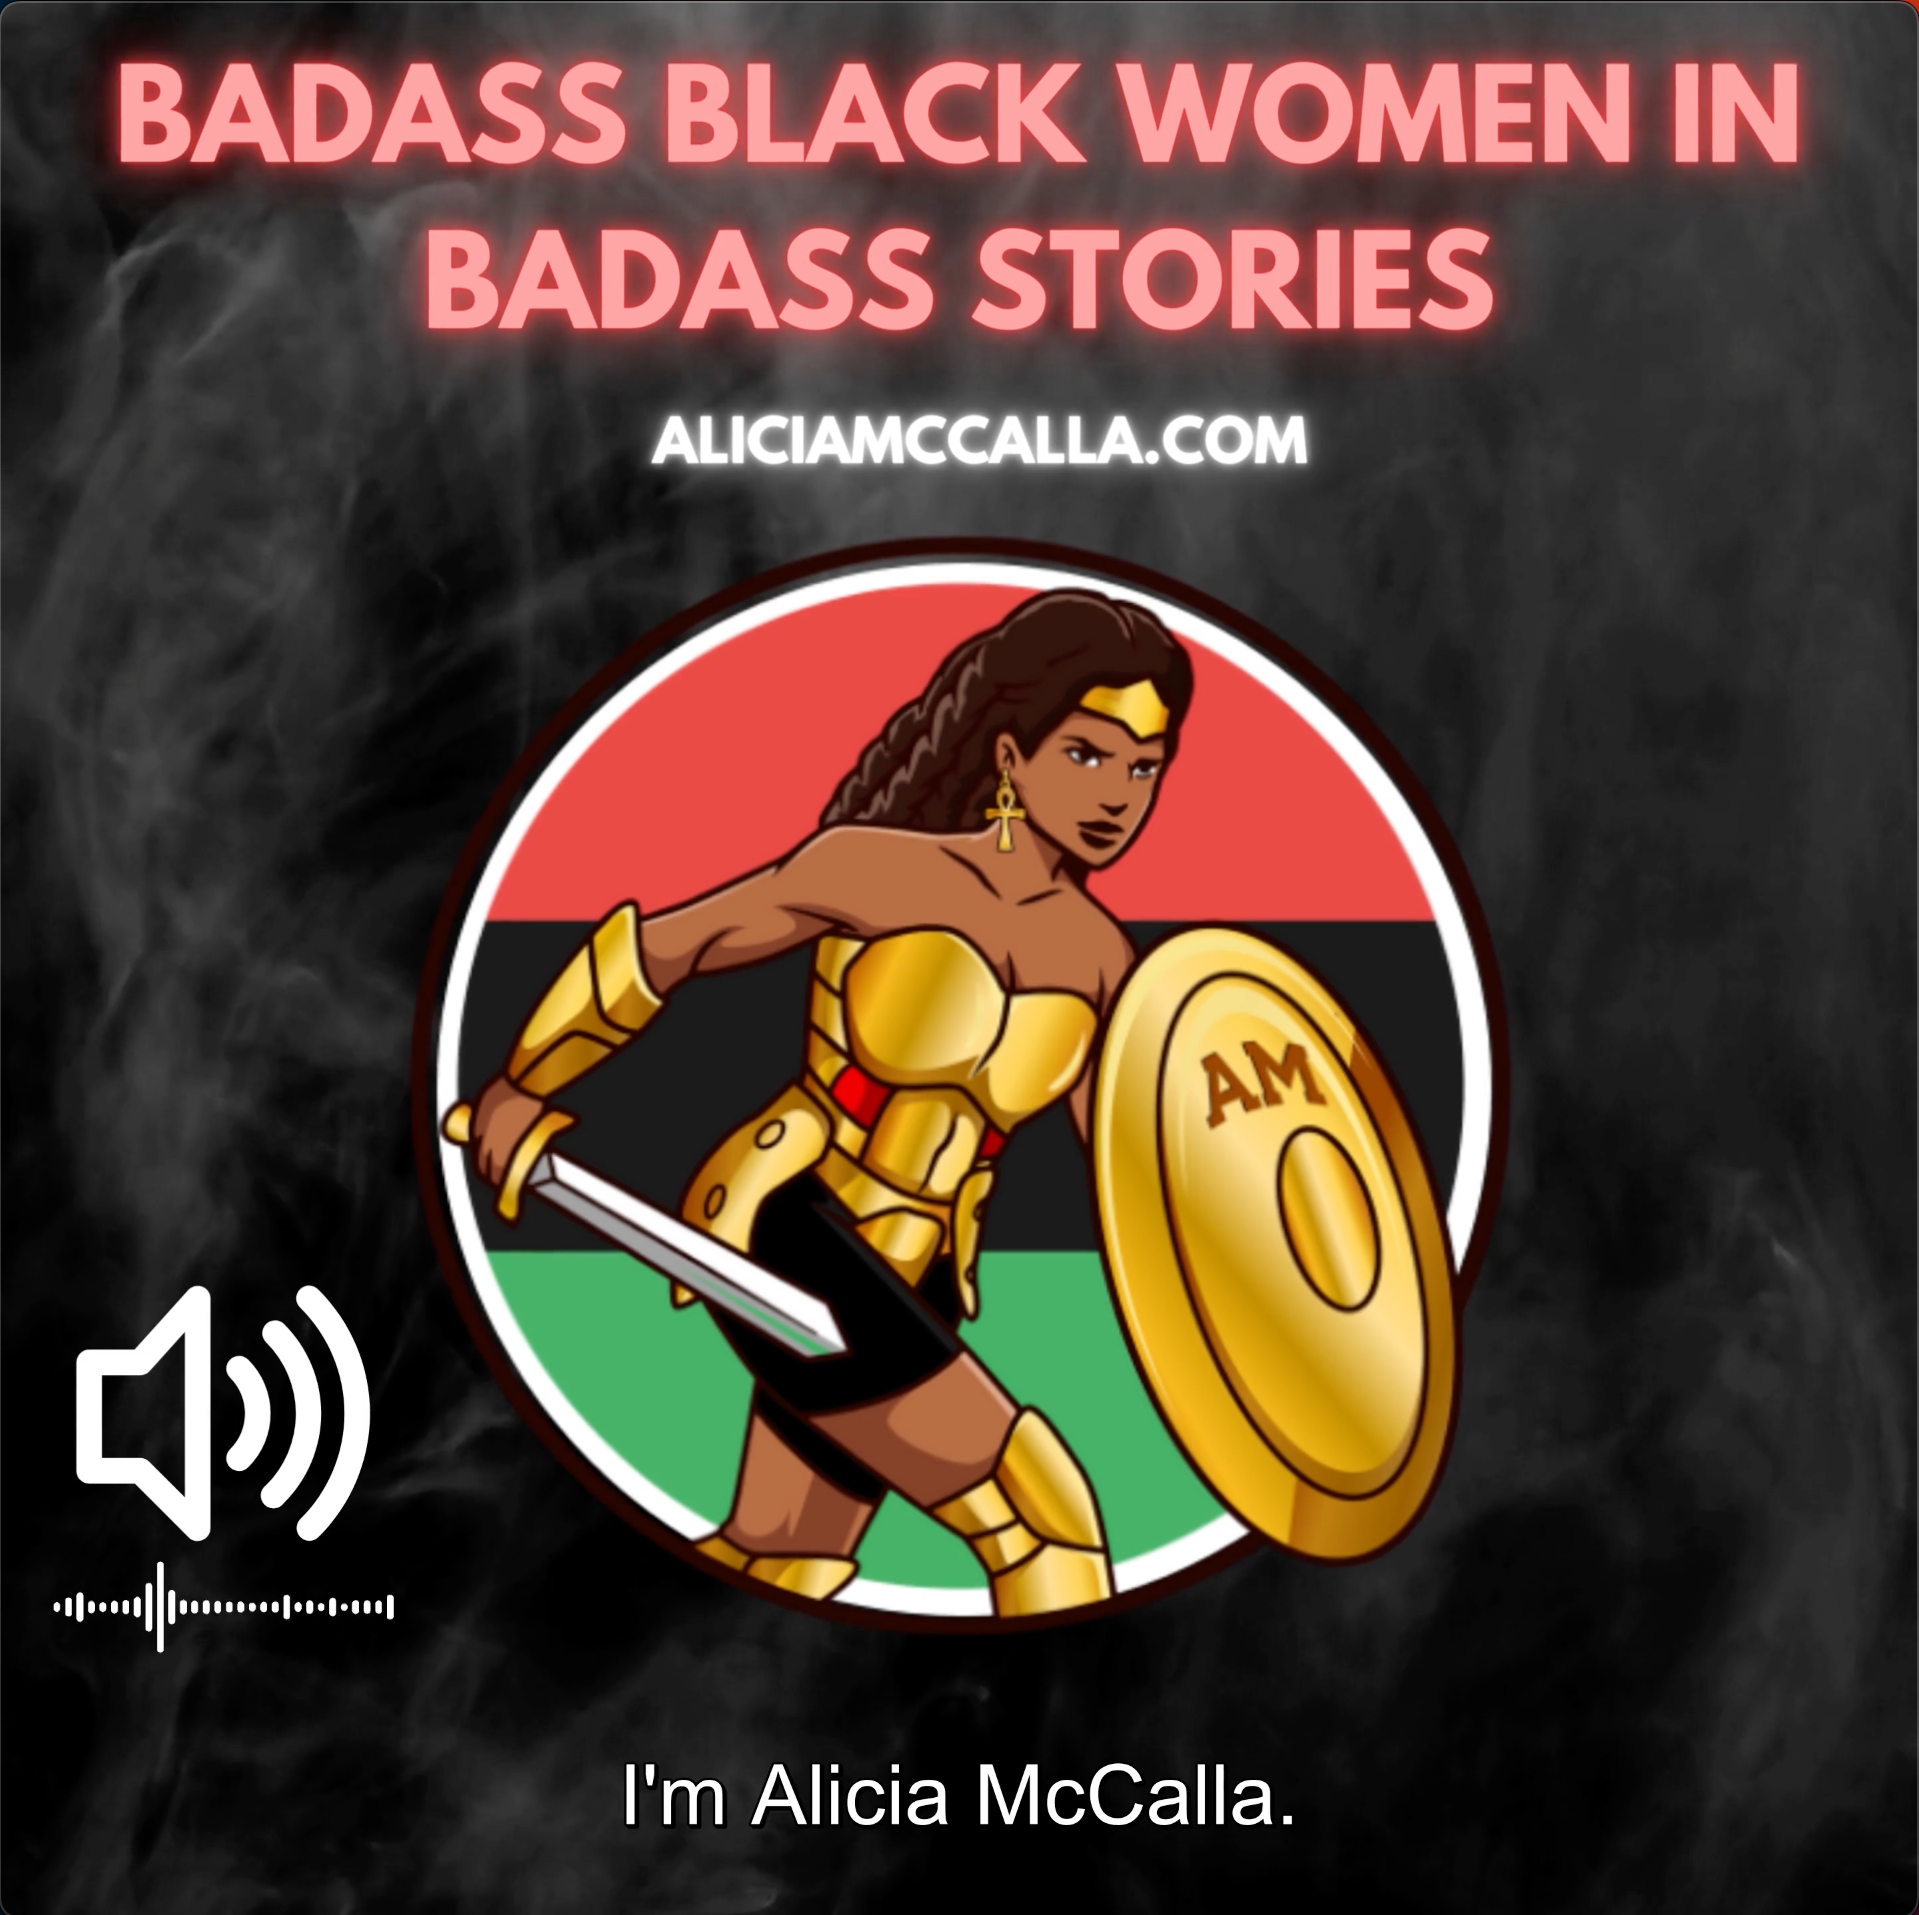 Load video: Author Alicia McCalla&#39;s Video about her Brand of Badass Black Women